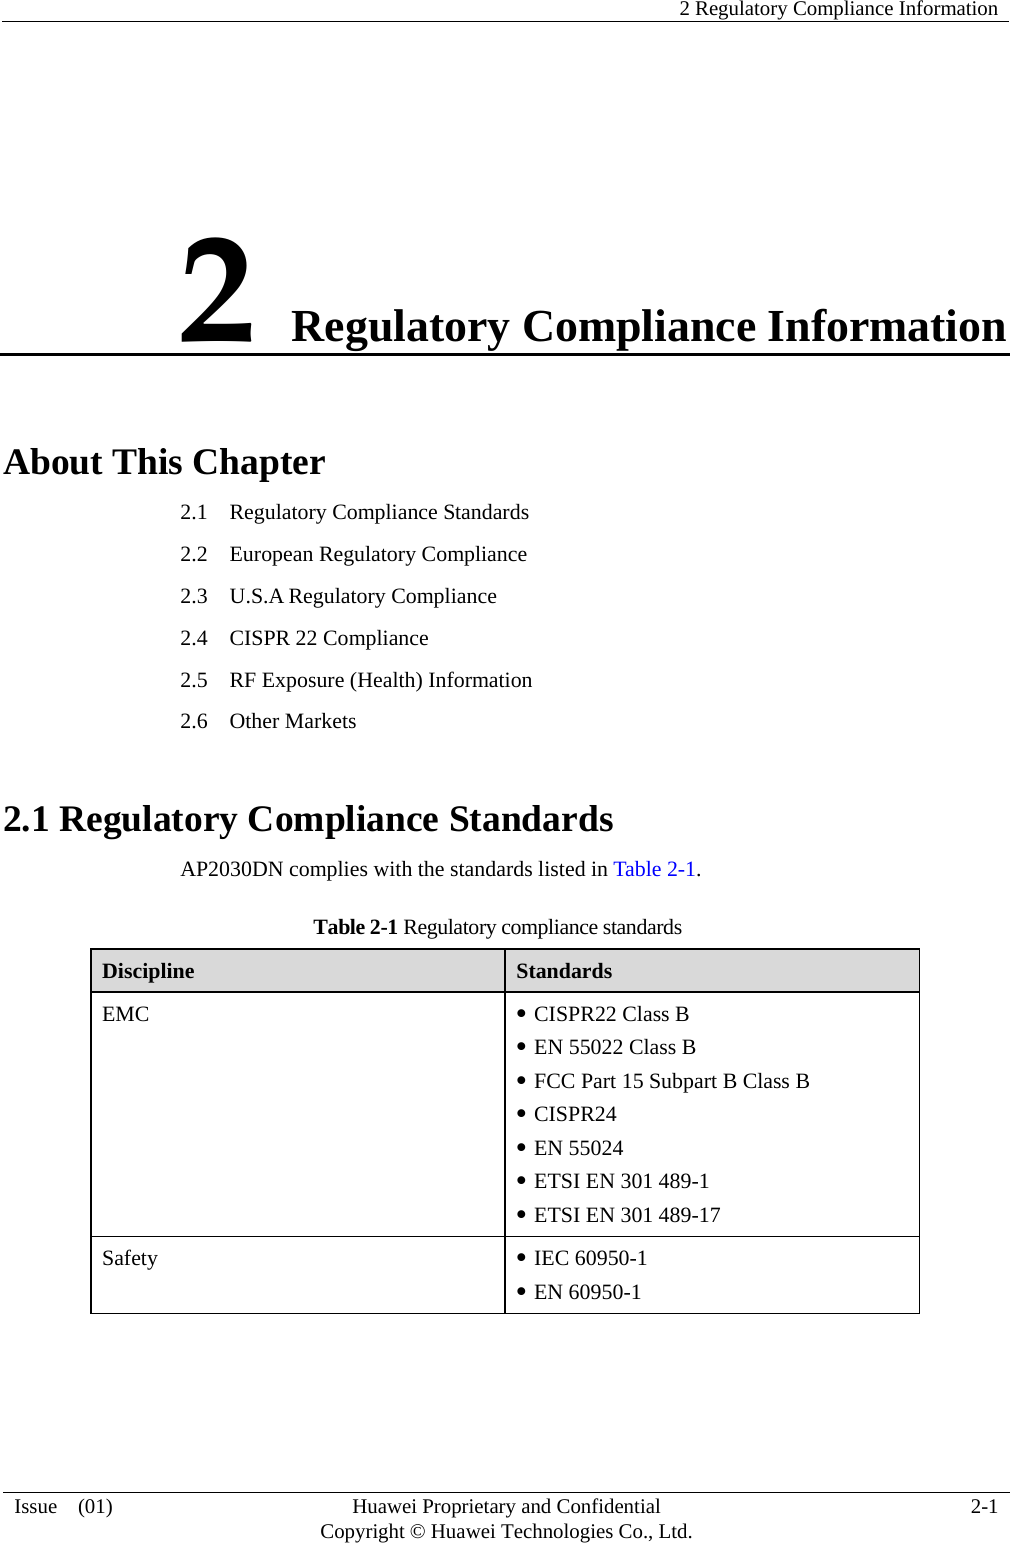    2 Regulatory Compliance Information  Issue  (01)  Huawei Proprietary and Confidential     Copyright © Huawei Technologies Co., Ltd. 2-1 2 Regulatory Compliance Information About This Chapter 2.1    Regulatory Compliance Standards 2.2  European Regulatory Compliance 2.3  U.S.A Regulatory Compliance 2.4    CISPR 22 Compliance 2.5    RF Exposure (Health) Information 2.6  Other Markets 2.1 Regulatory Compliance Standards AP2030DN complies with the standards listed in Table 2-1. Table 2-1 Regulatory compliance standards Discipline  Standards EMC  z CISPR22 Class B z EN 55022 Class B z FCC Part 15 Subpart B Class B z CISPR24 z EN 55024 z ETSI EN 301 489-1   z ETSI EN 301 489-17 Safety  z IEC 60950-1 z EN 60950-1 